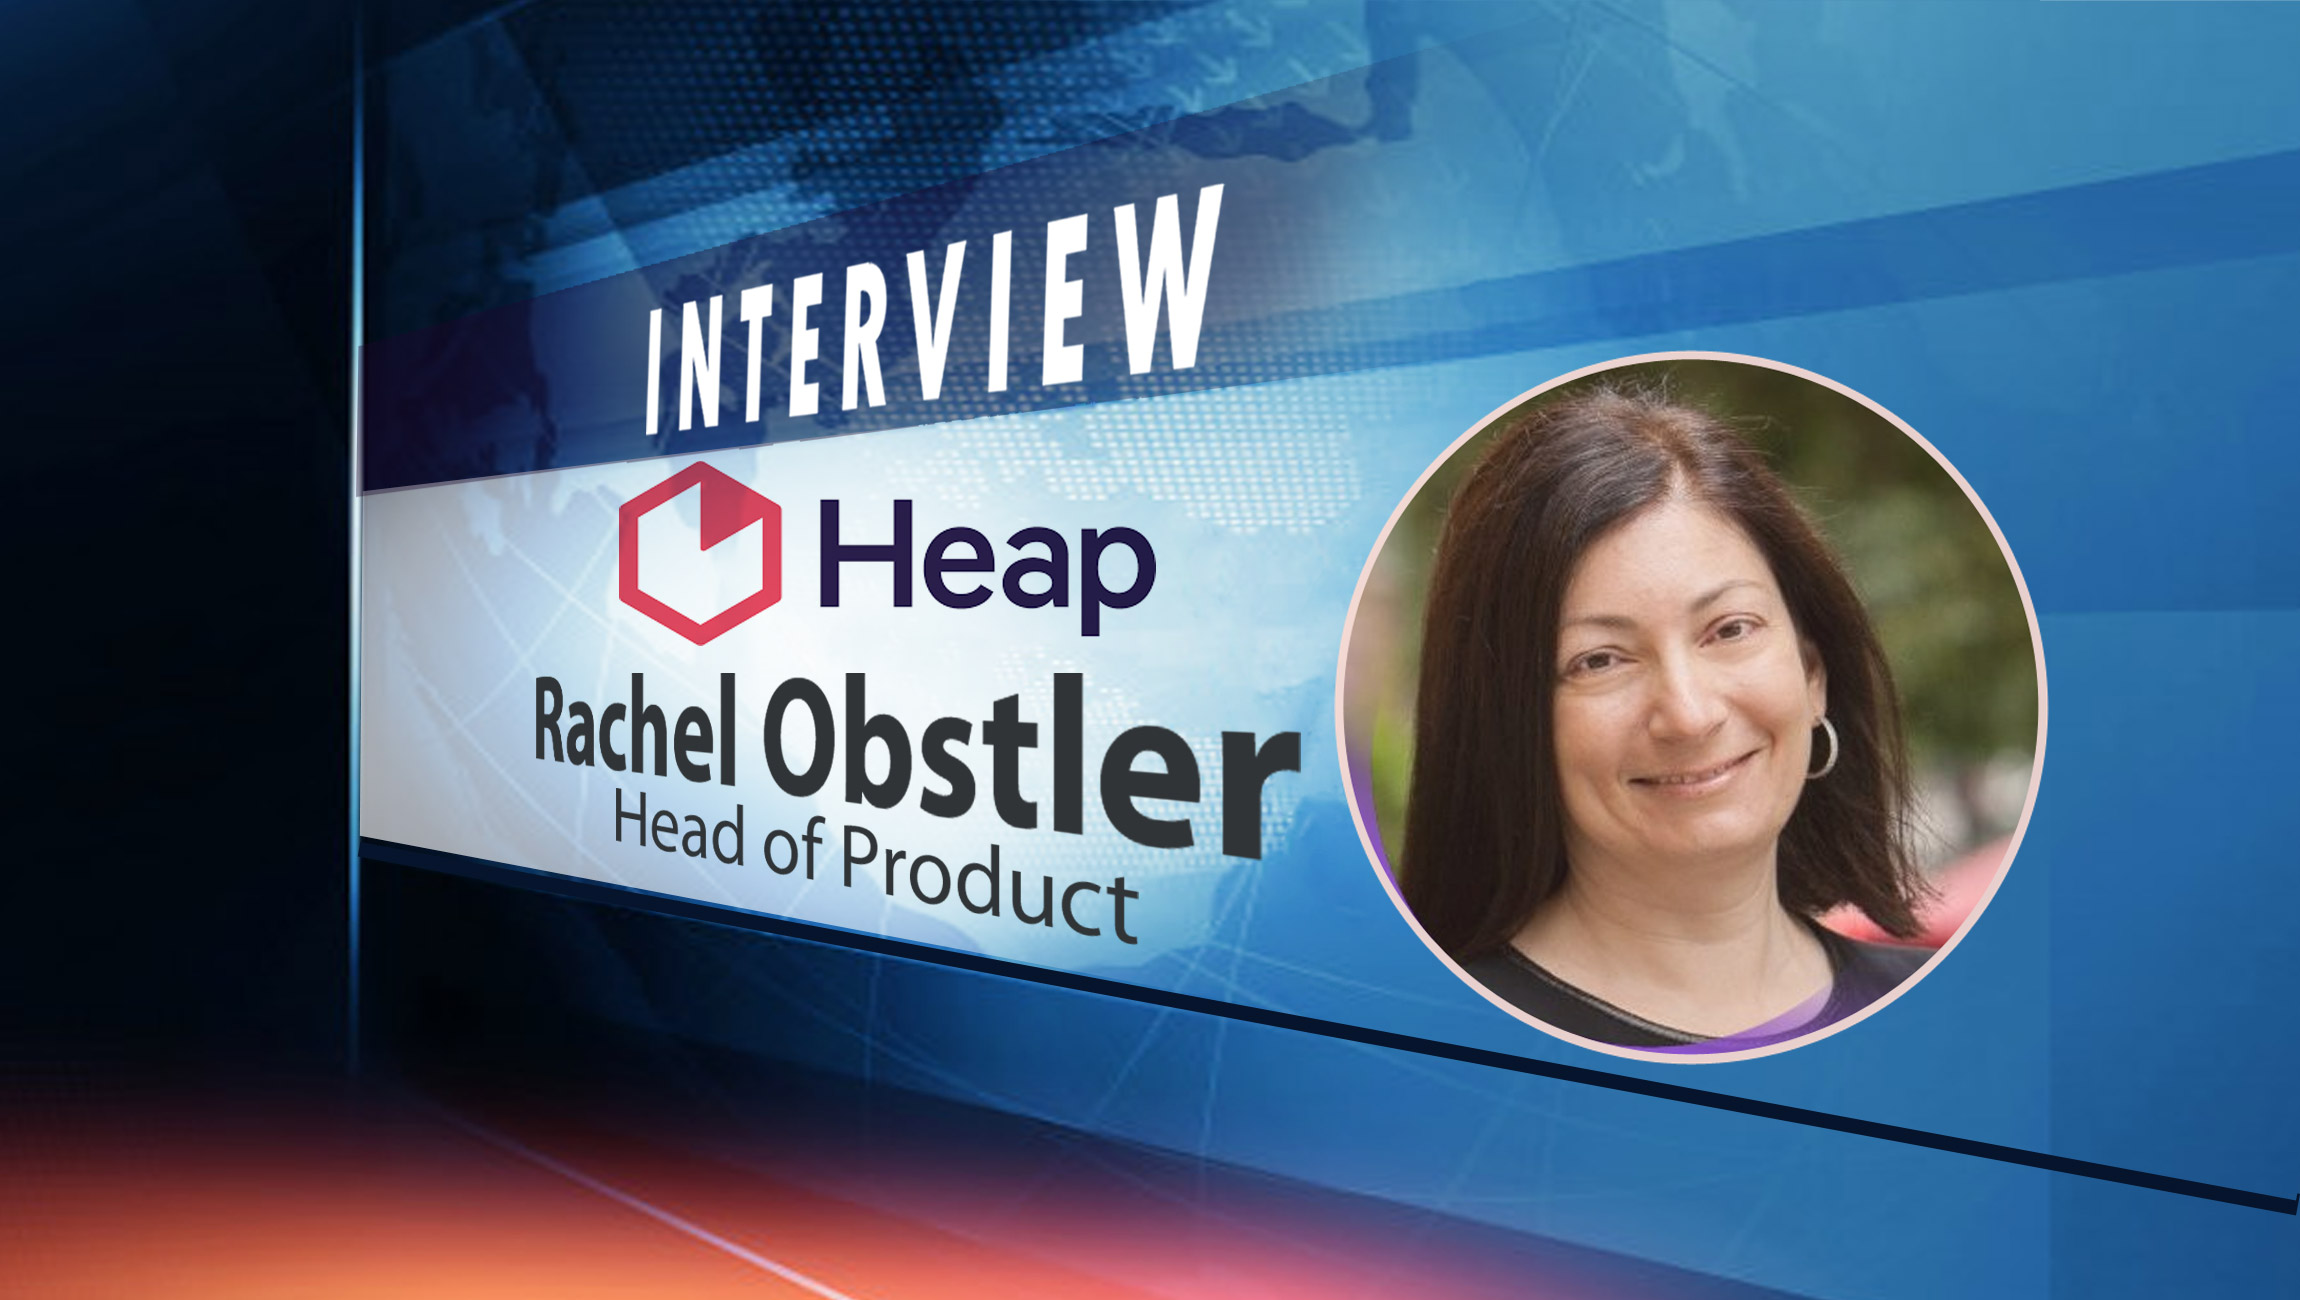 SalesTechStar Interview with Rachel Obstler, Head of Product at Heap